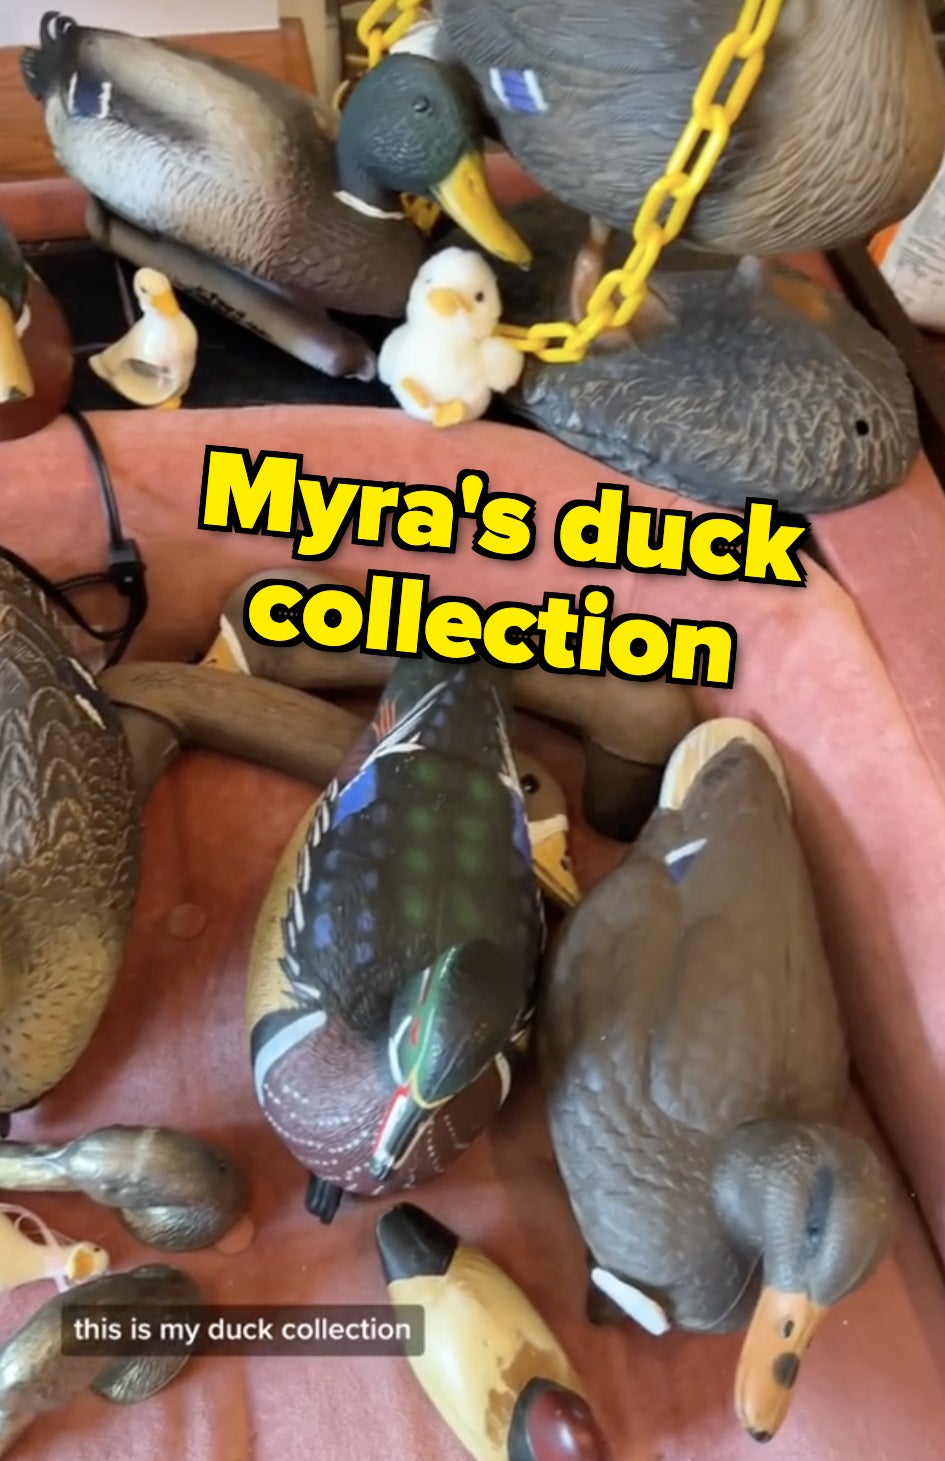 Myra&#x27;s duck collection is being displayed